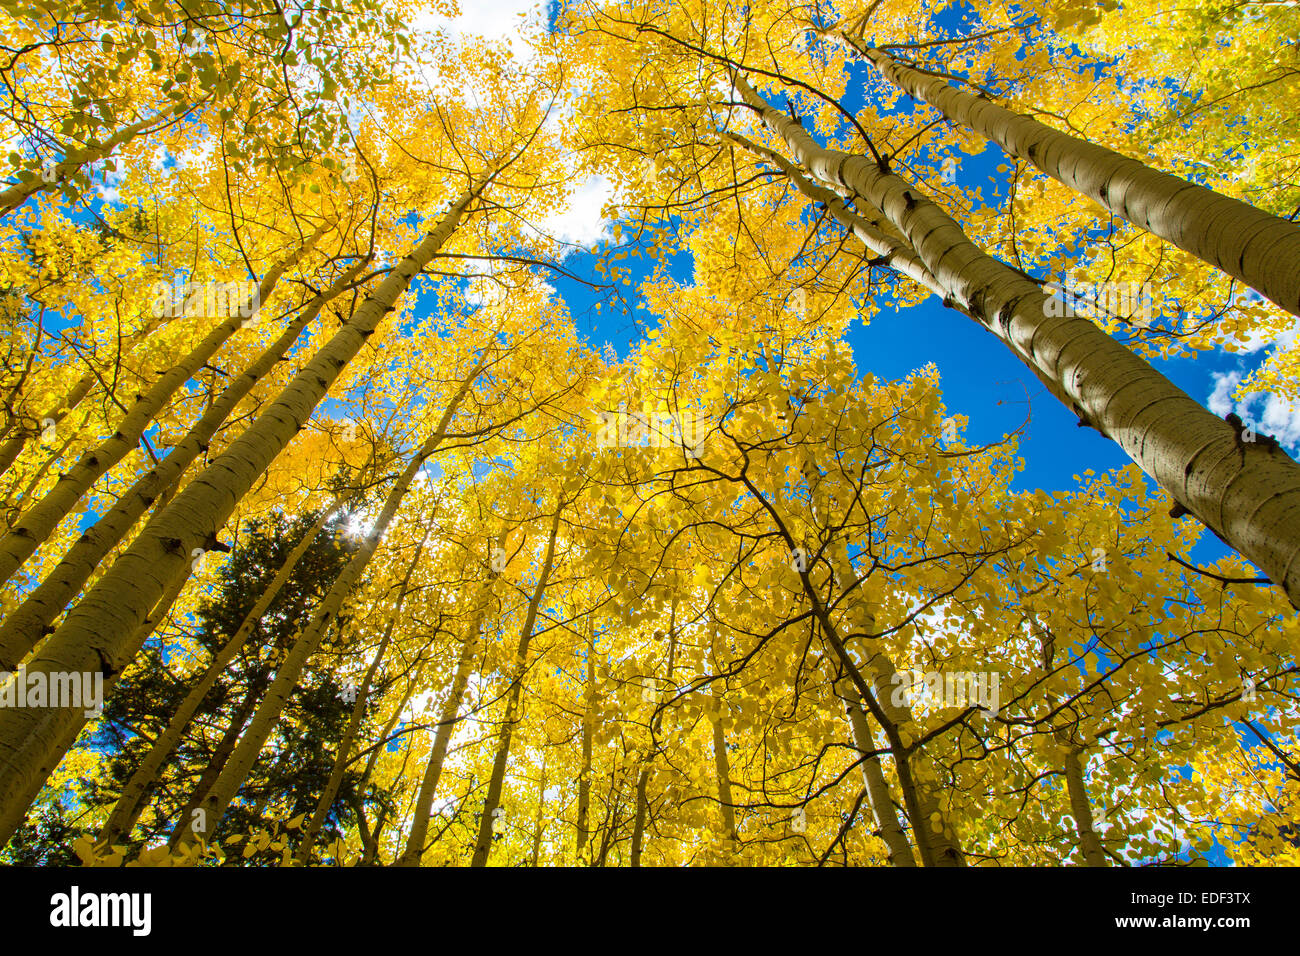 Looking up into bright yellow Aspen trees with blue sky on a fall day in Colorado Stock Photo